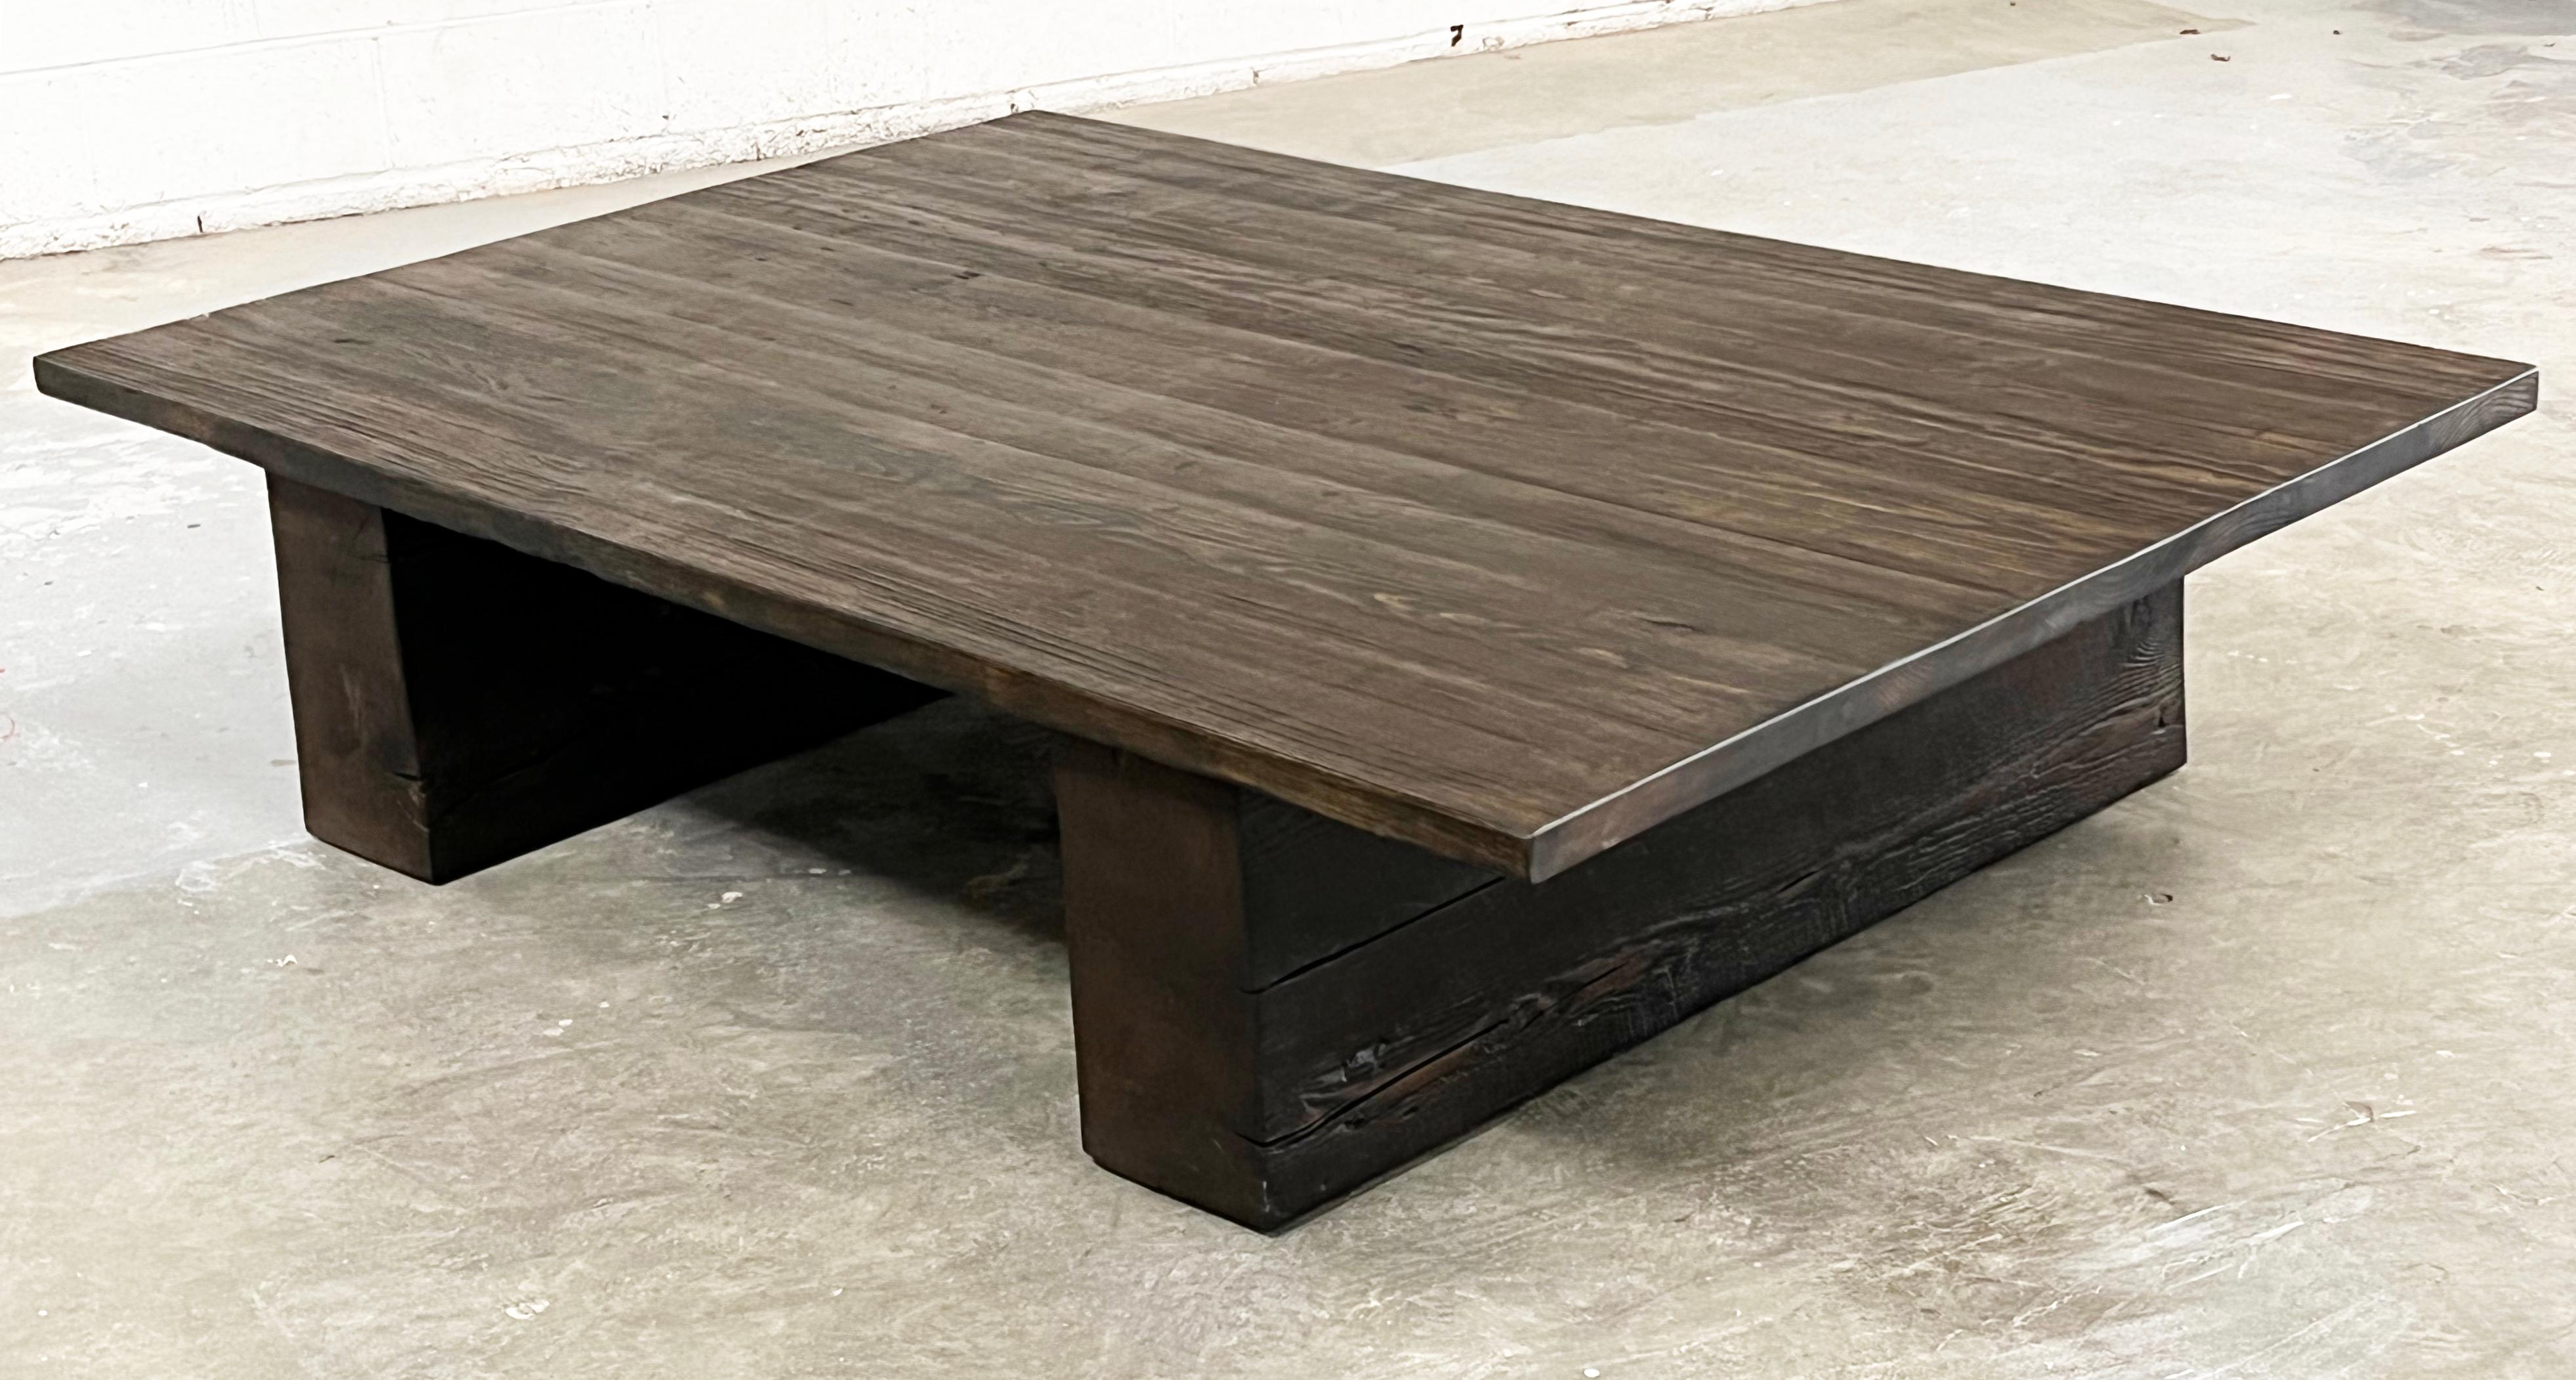 This coffee table is seen here in 152 x 96cm, but can be ordered in any size. It is built with an oak top and the base is made from reclaimed pine blocks. 

Each table is bench-made in our London workshop using traditional traditional carpentry